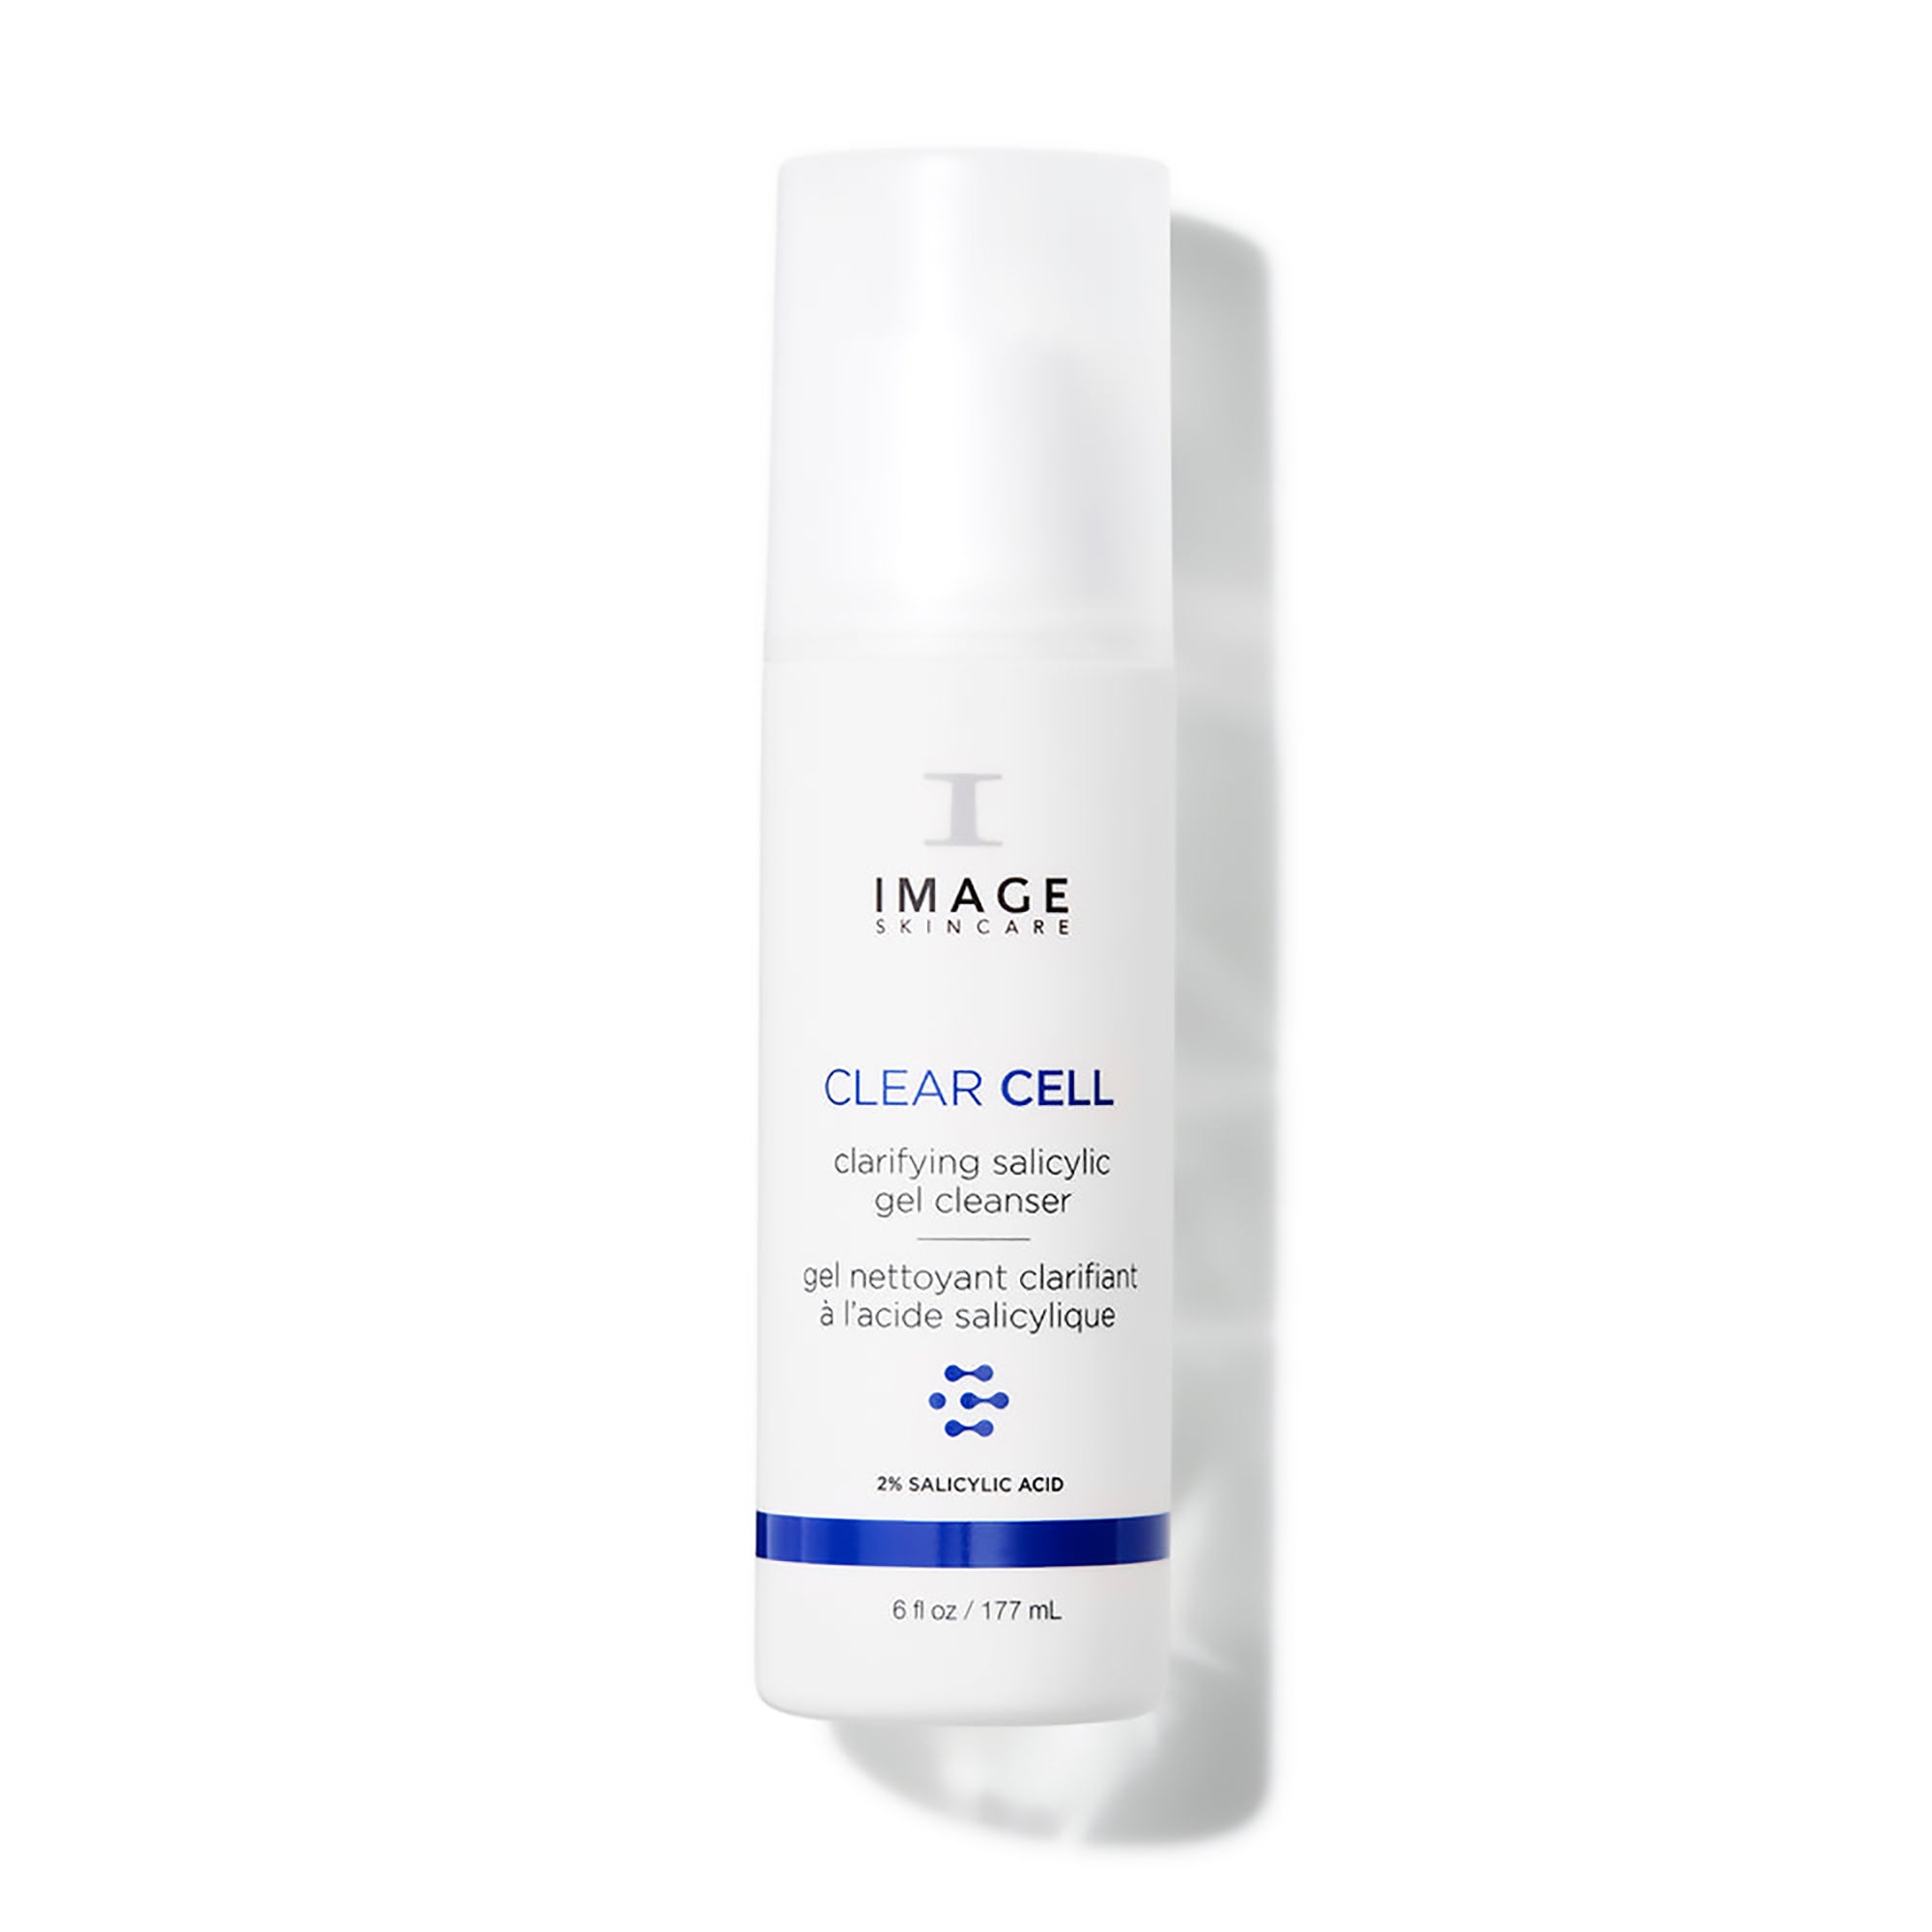 Image Skincare Clear Cell Salicylic Gel Cleanser / 6OZ